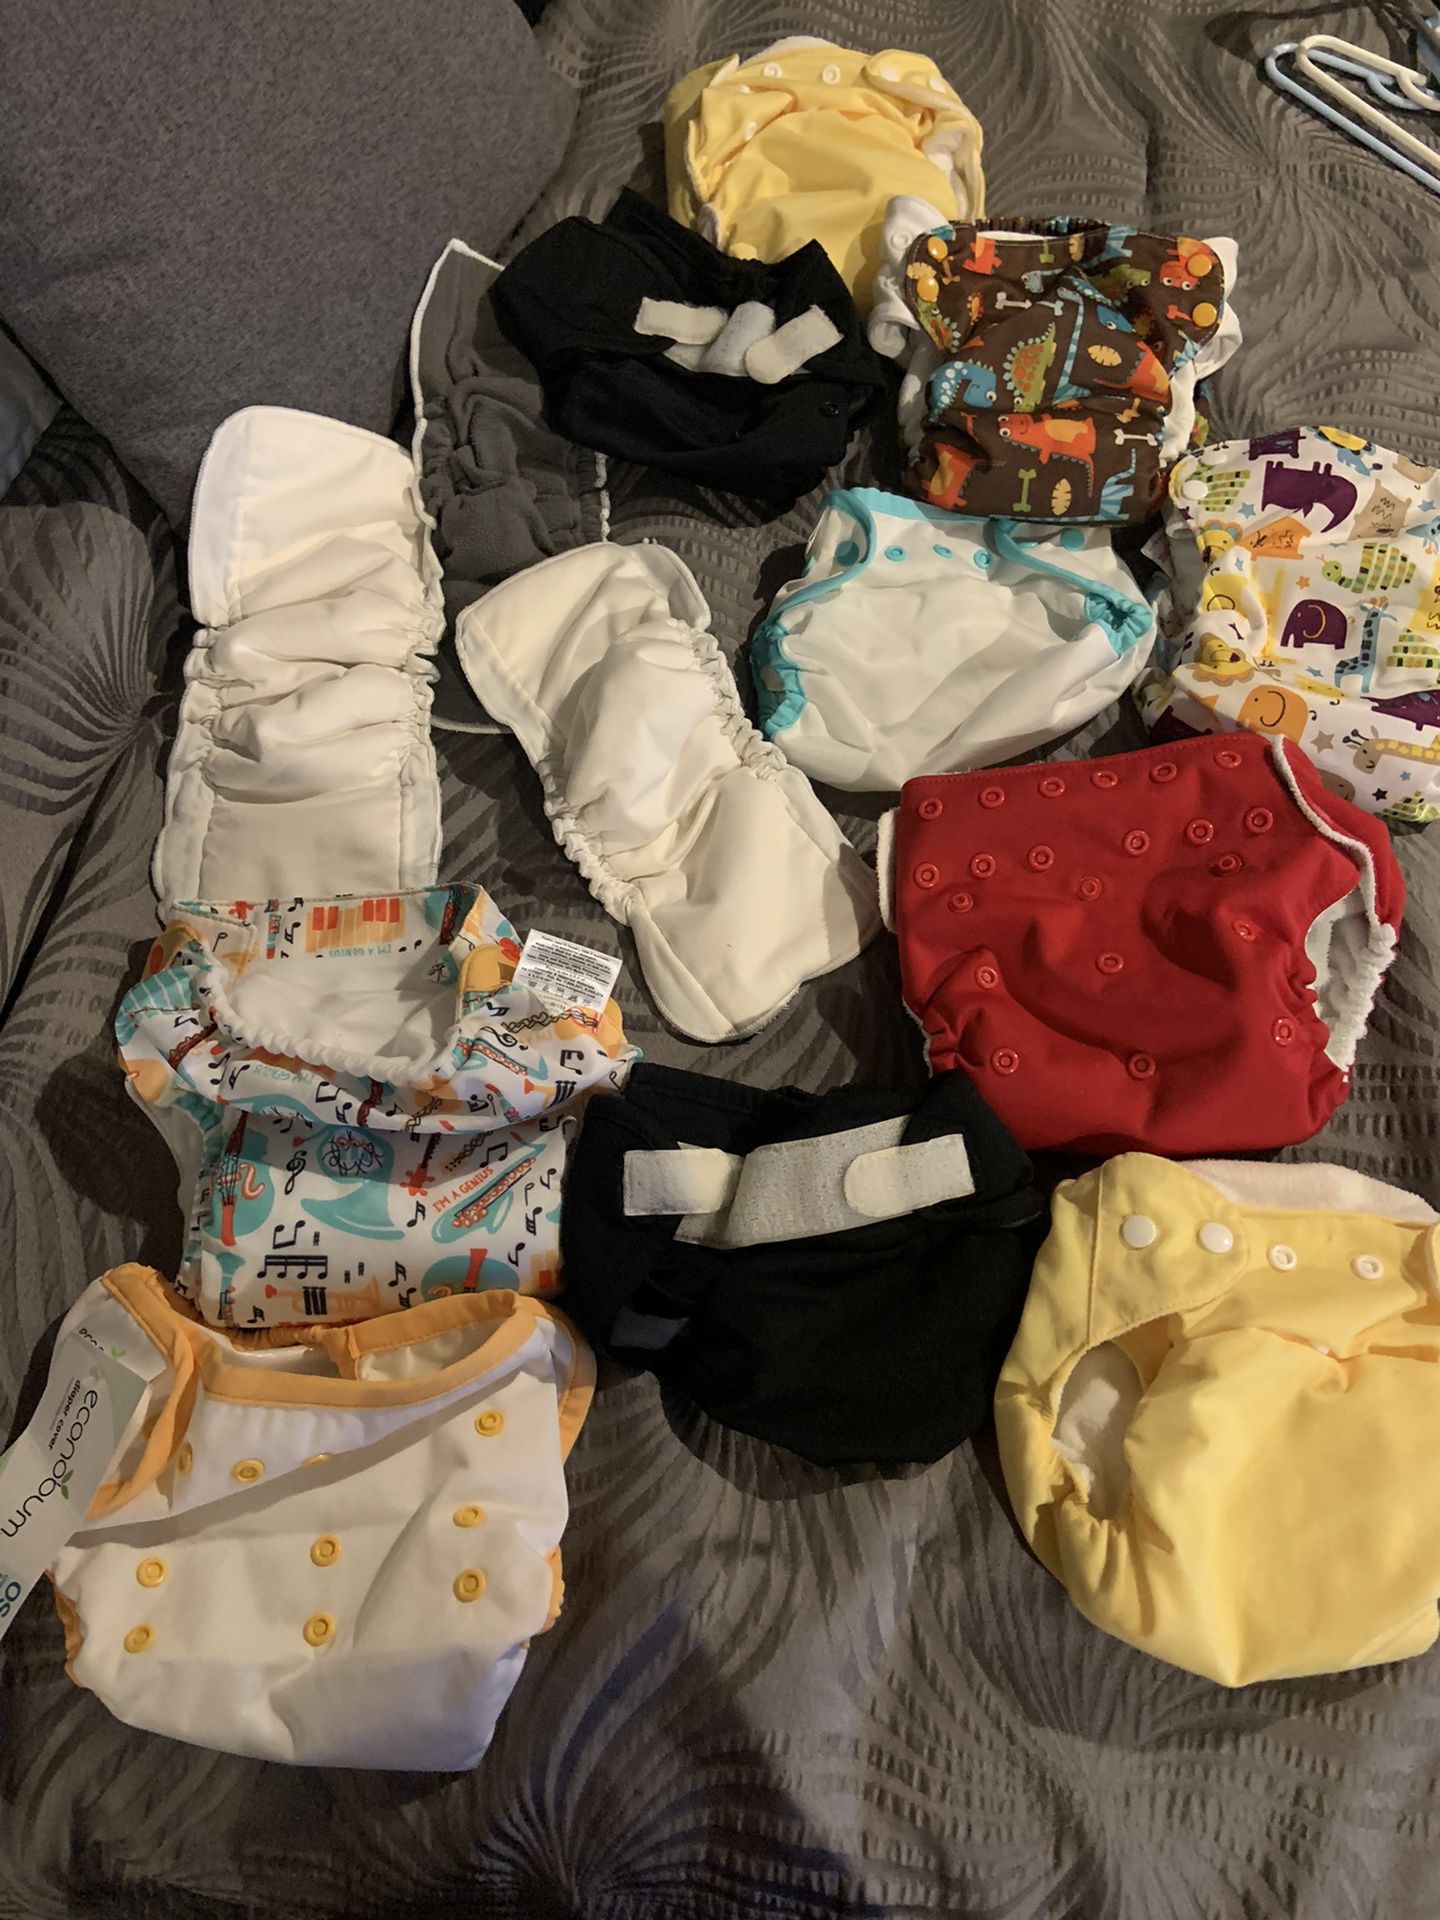 Cloth diapers 